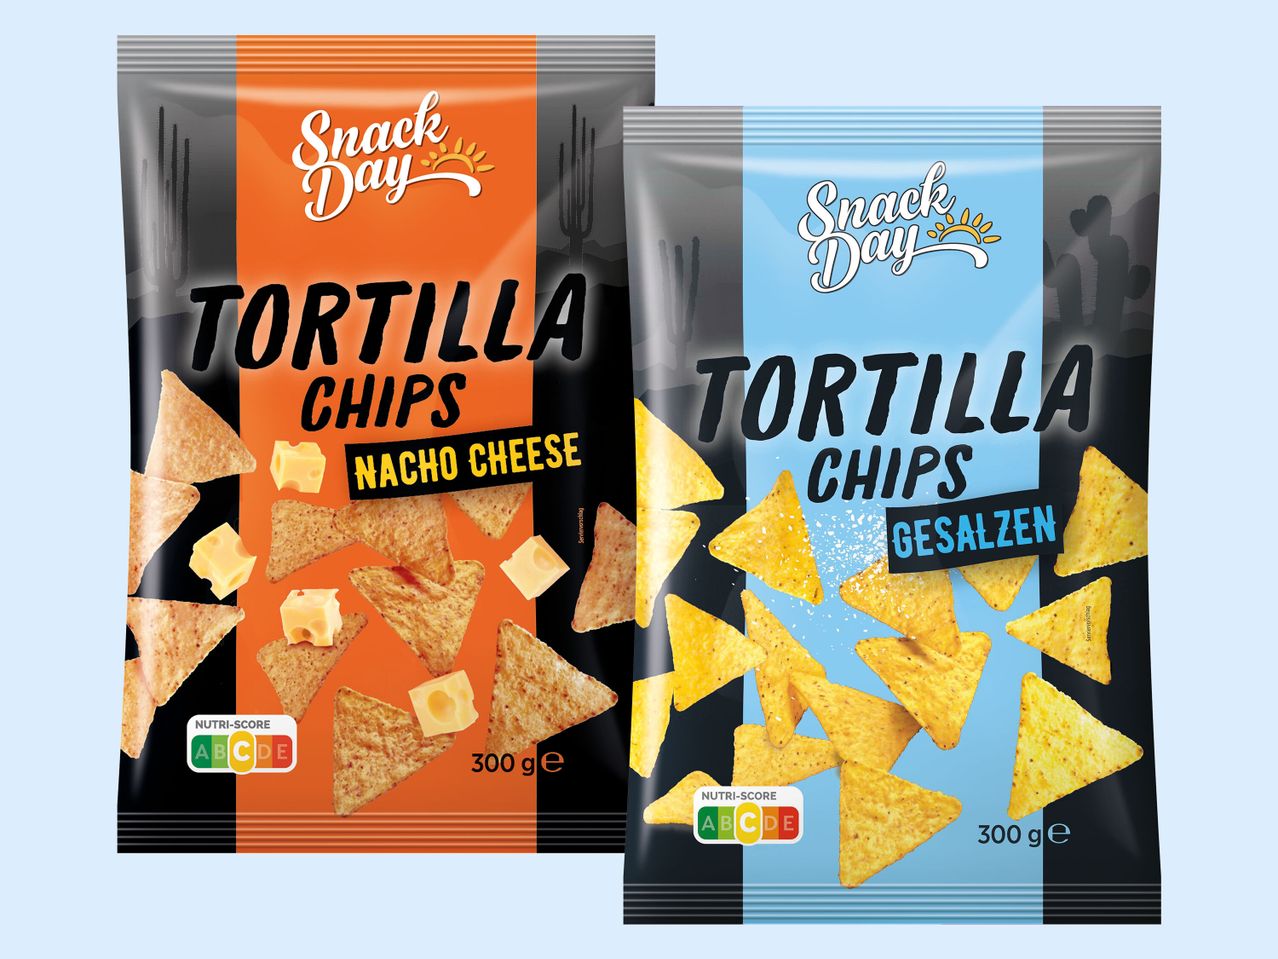 Snack Chips Day Tortilla